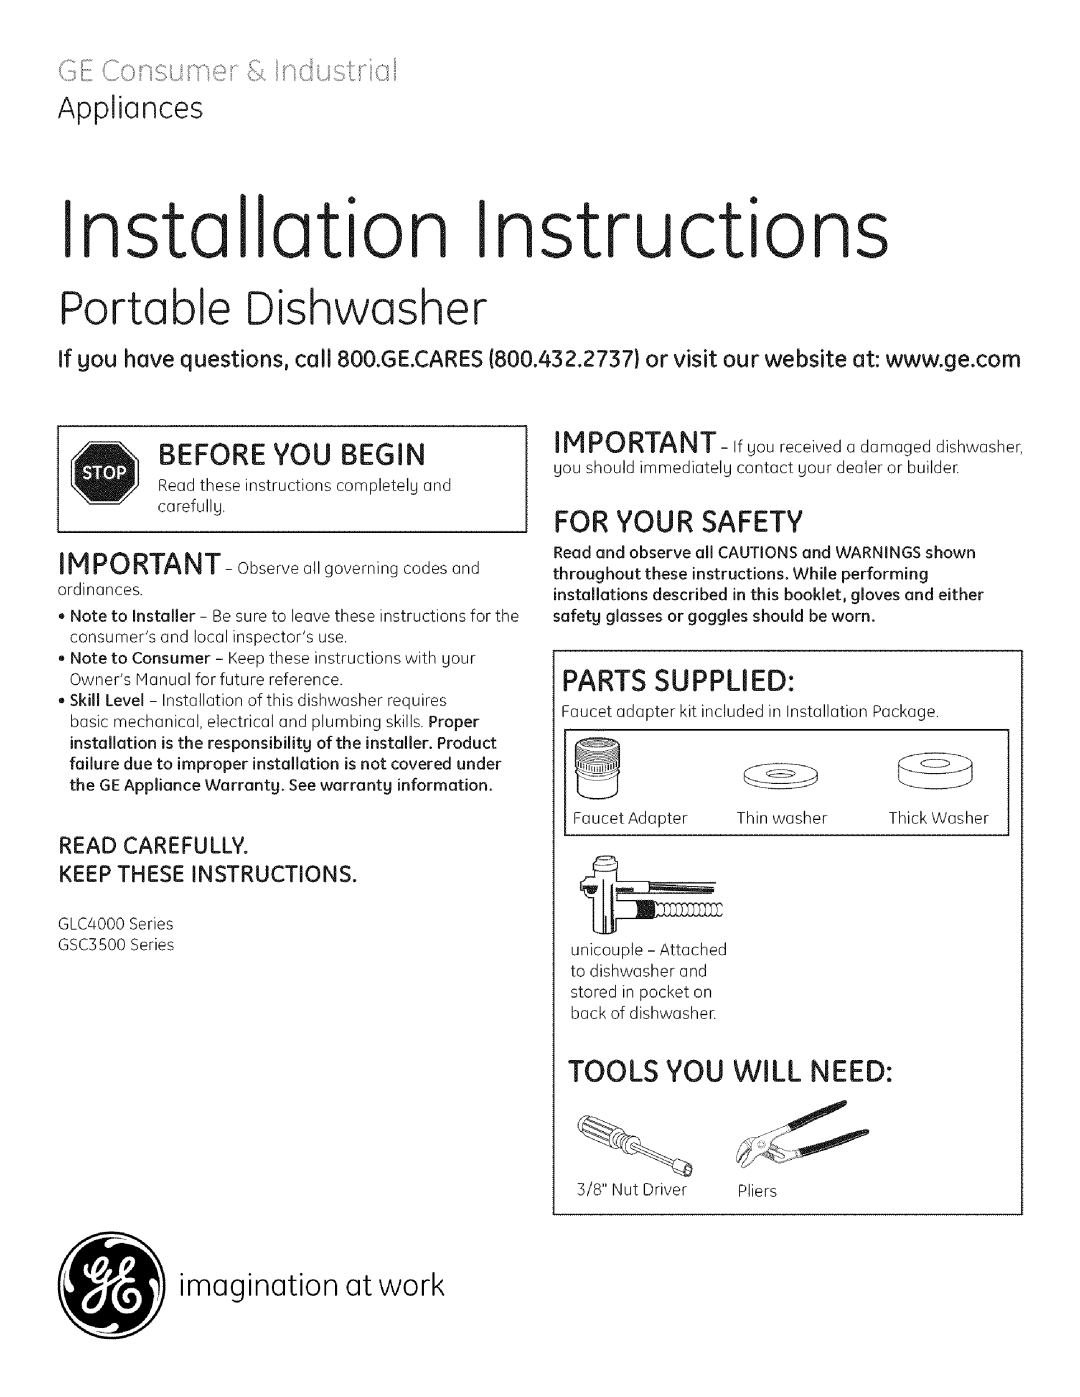 GE GLC4000 installation instructions ination atwork imag, Read Carefully Keep These Instructions, Portable Dishwasher 